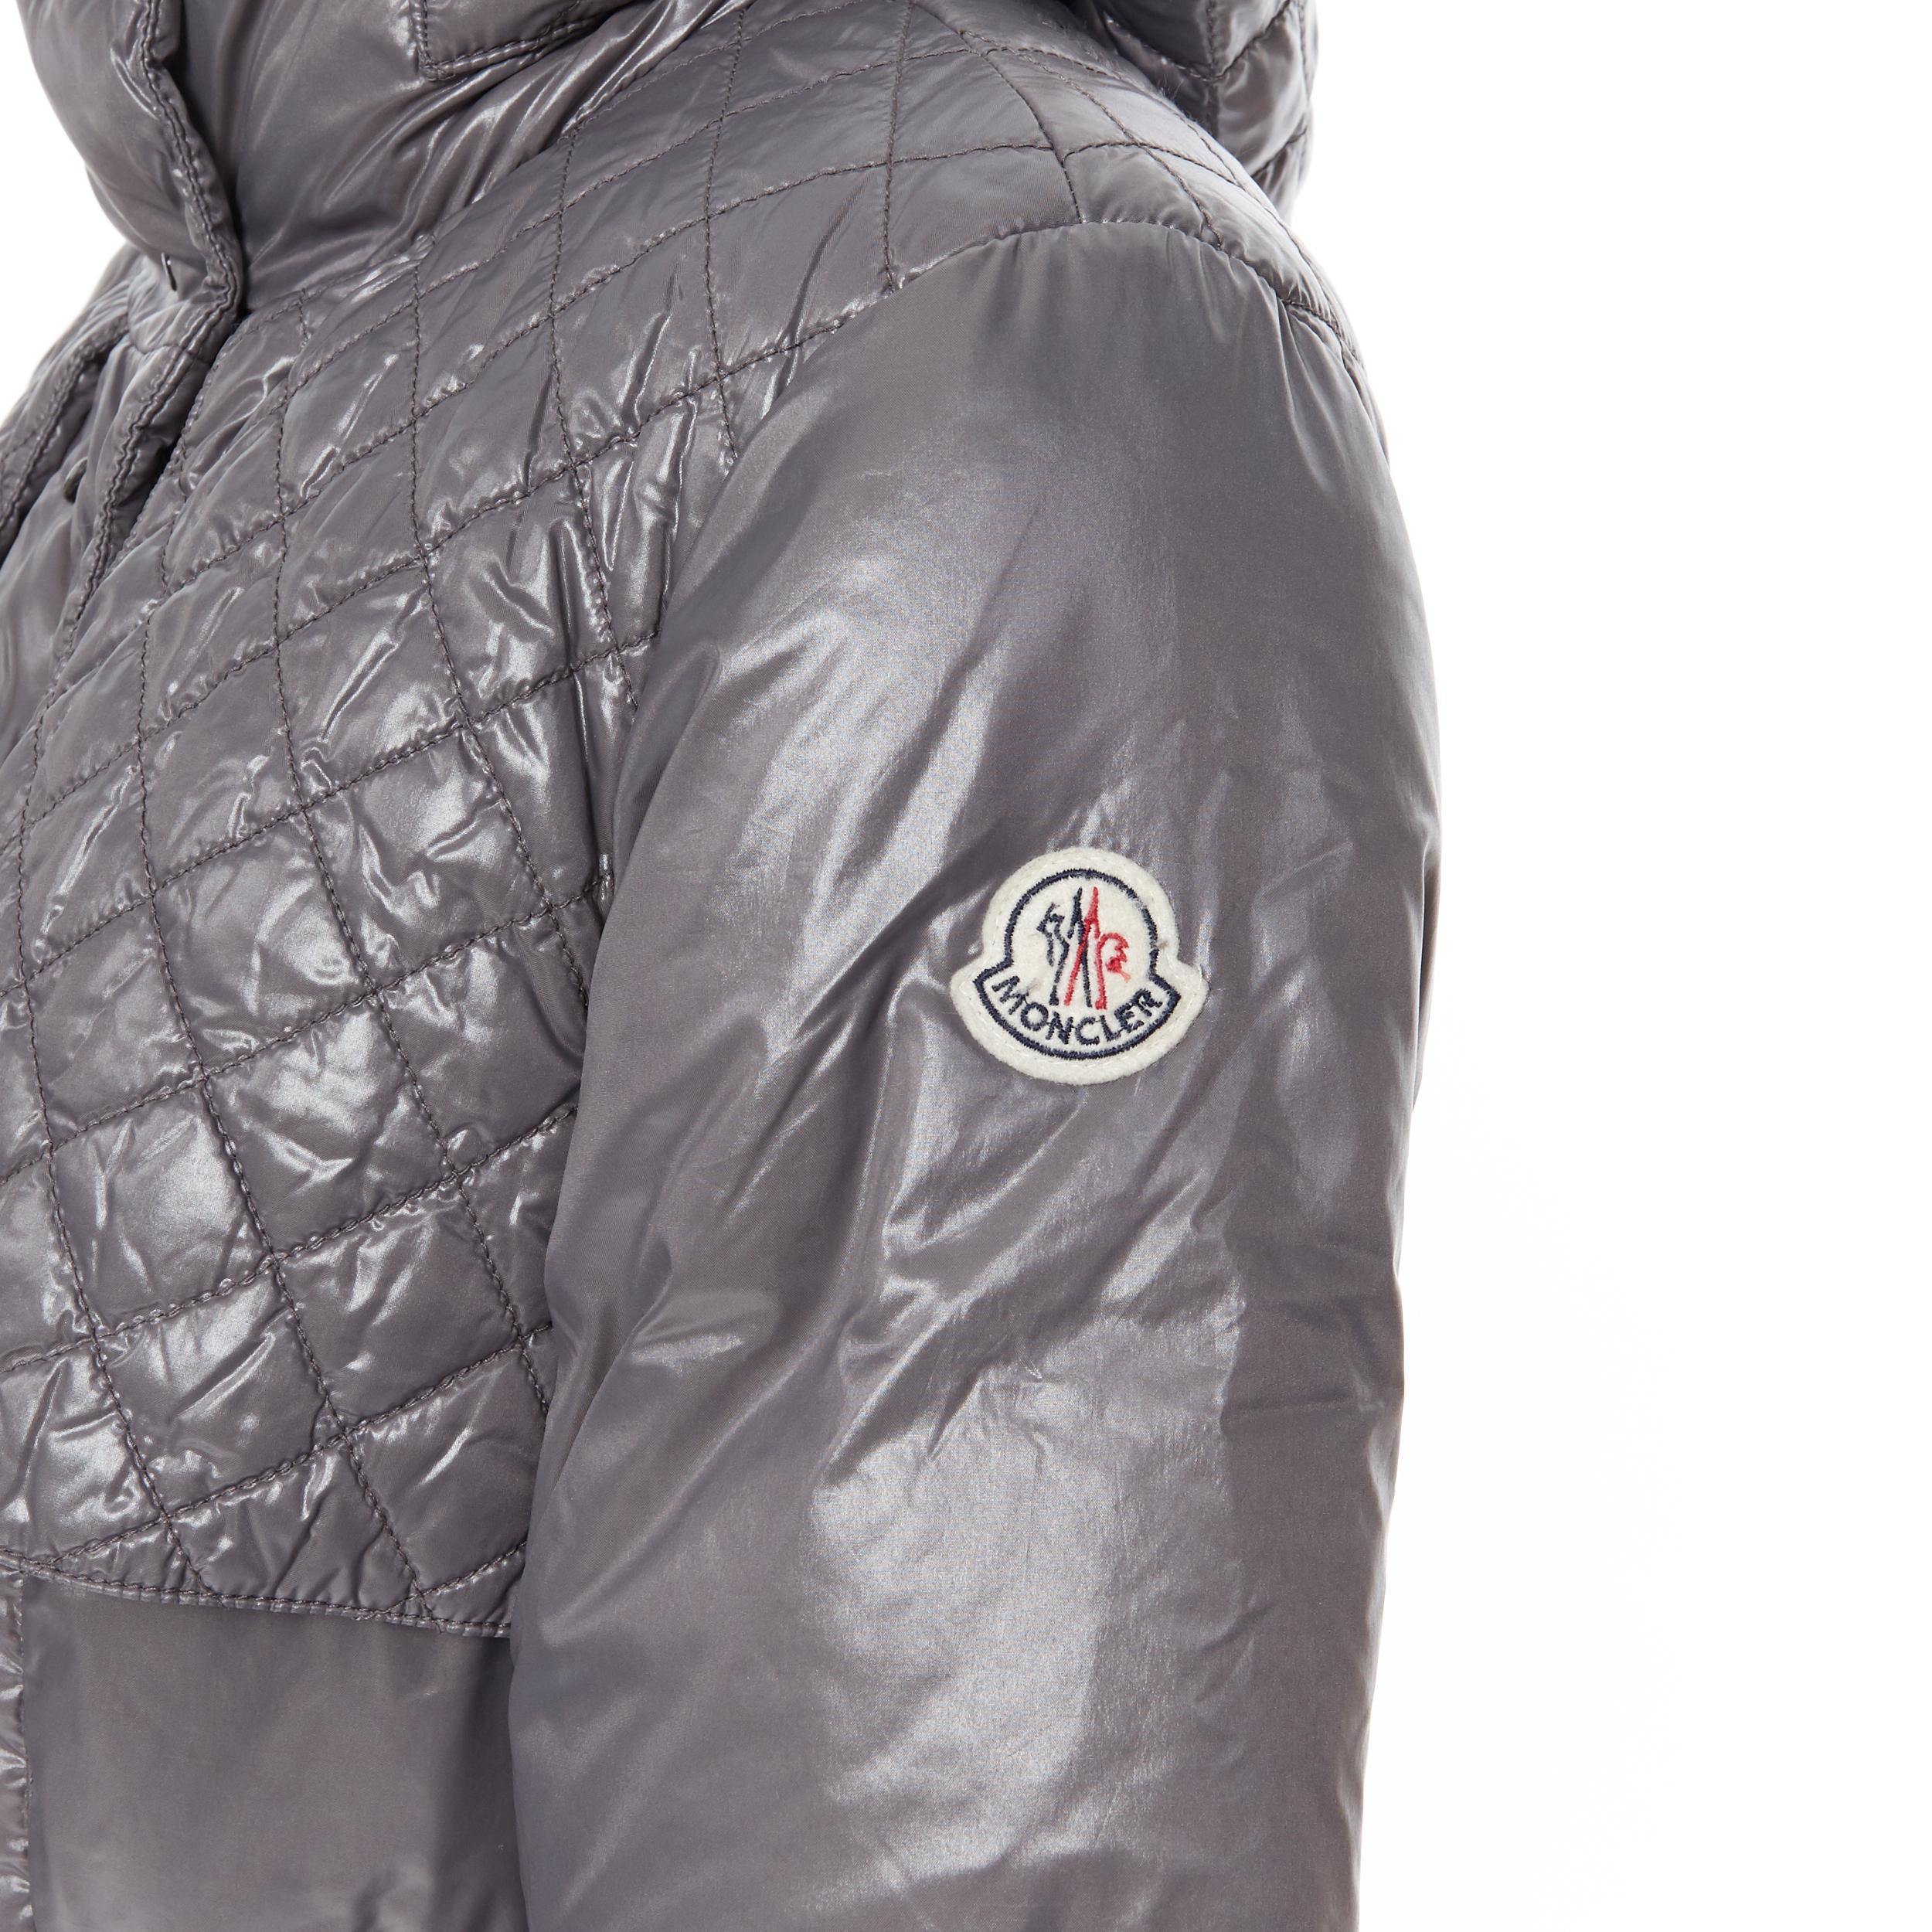 MONCLER Carson grey quilted genuine down feather padded puffer coat Sz. 2 M
Brand: Moncler
Model Name / Style: Puffer jacket
Material: Nylon, genuine down feather
Color: Grey
Pattern: Solid
Closure: Zip
Extra Detail: Genuine down feather